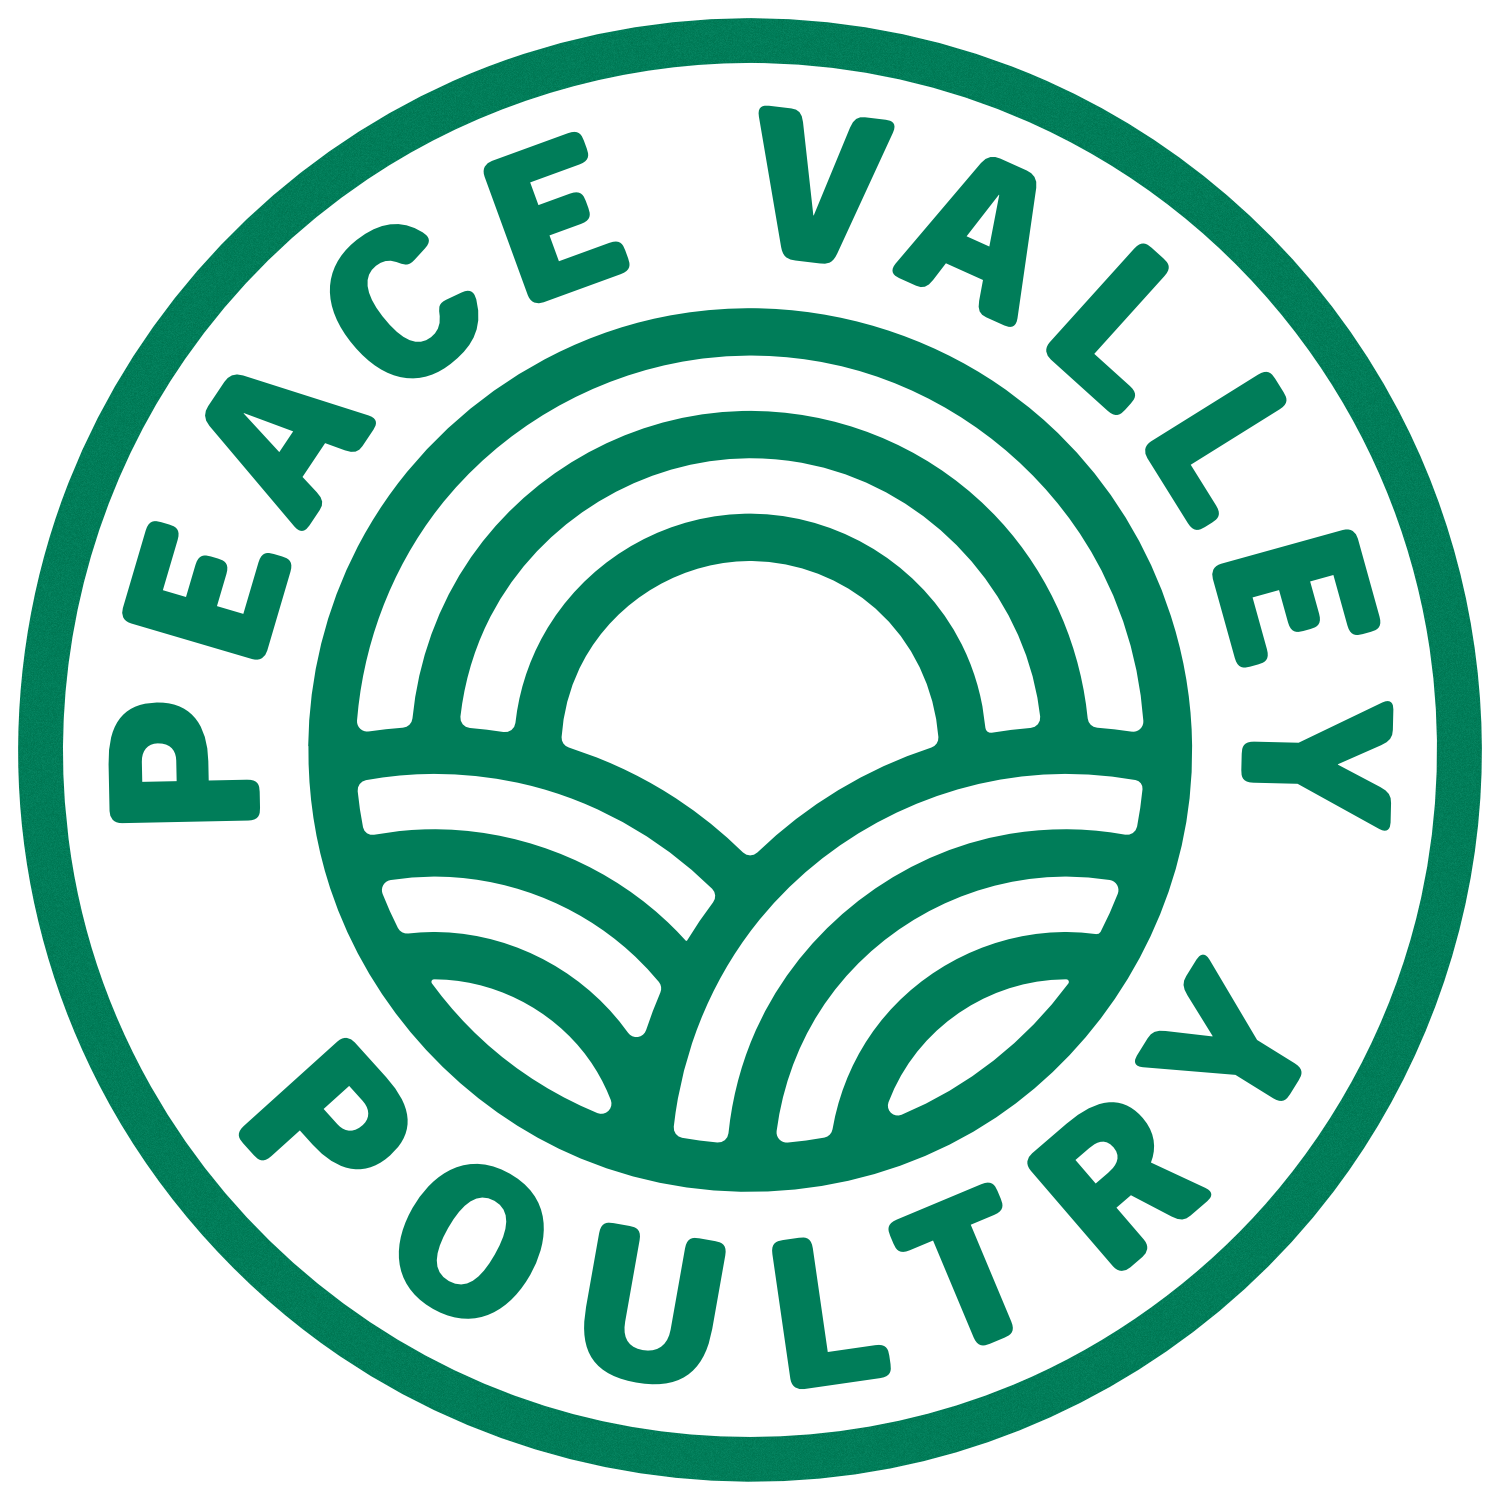 Peace Valley Poultry